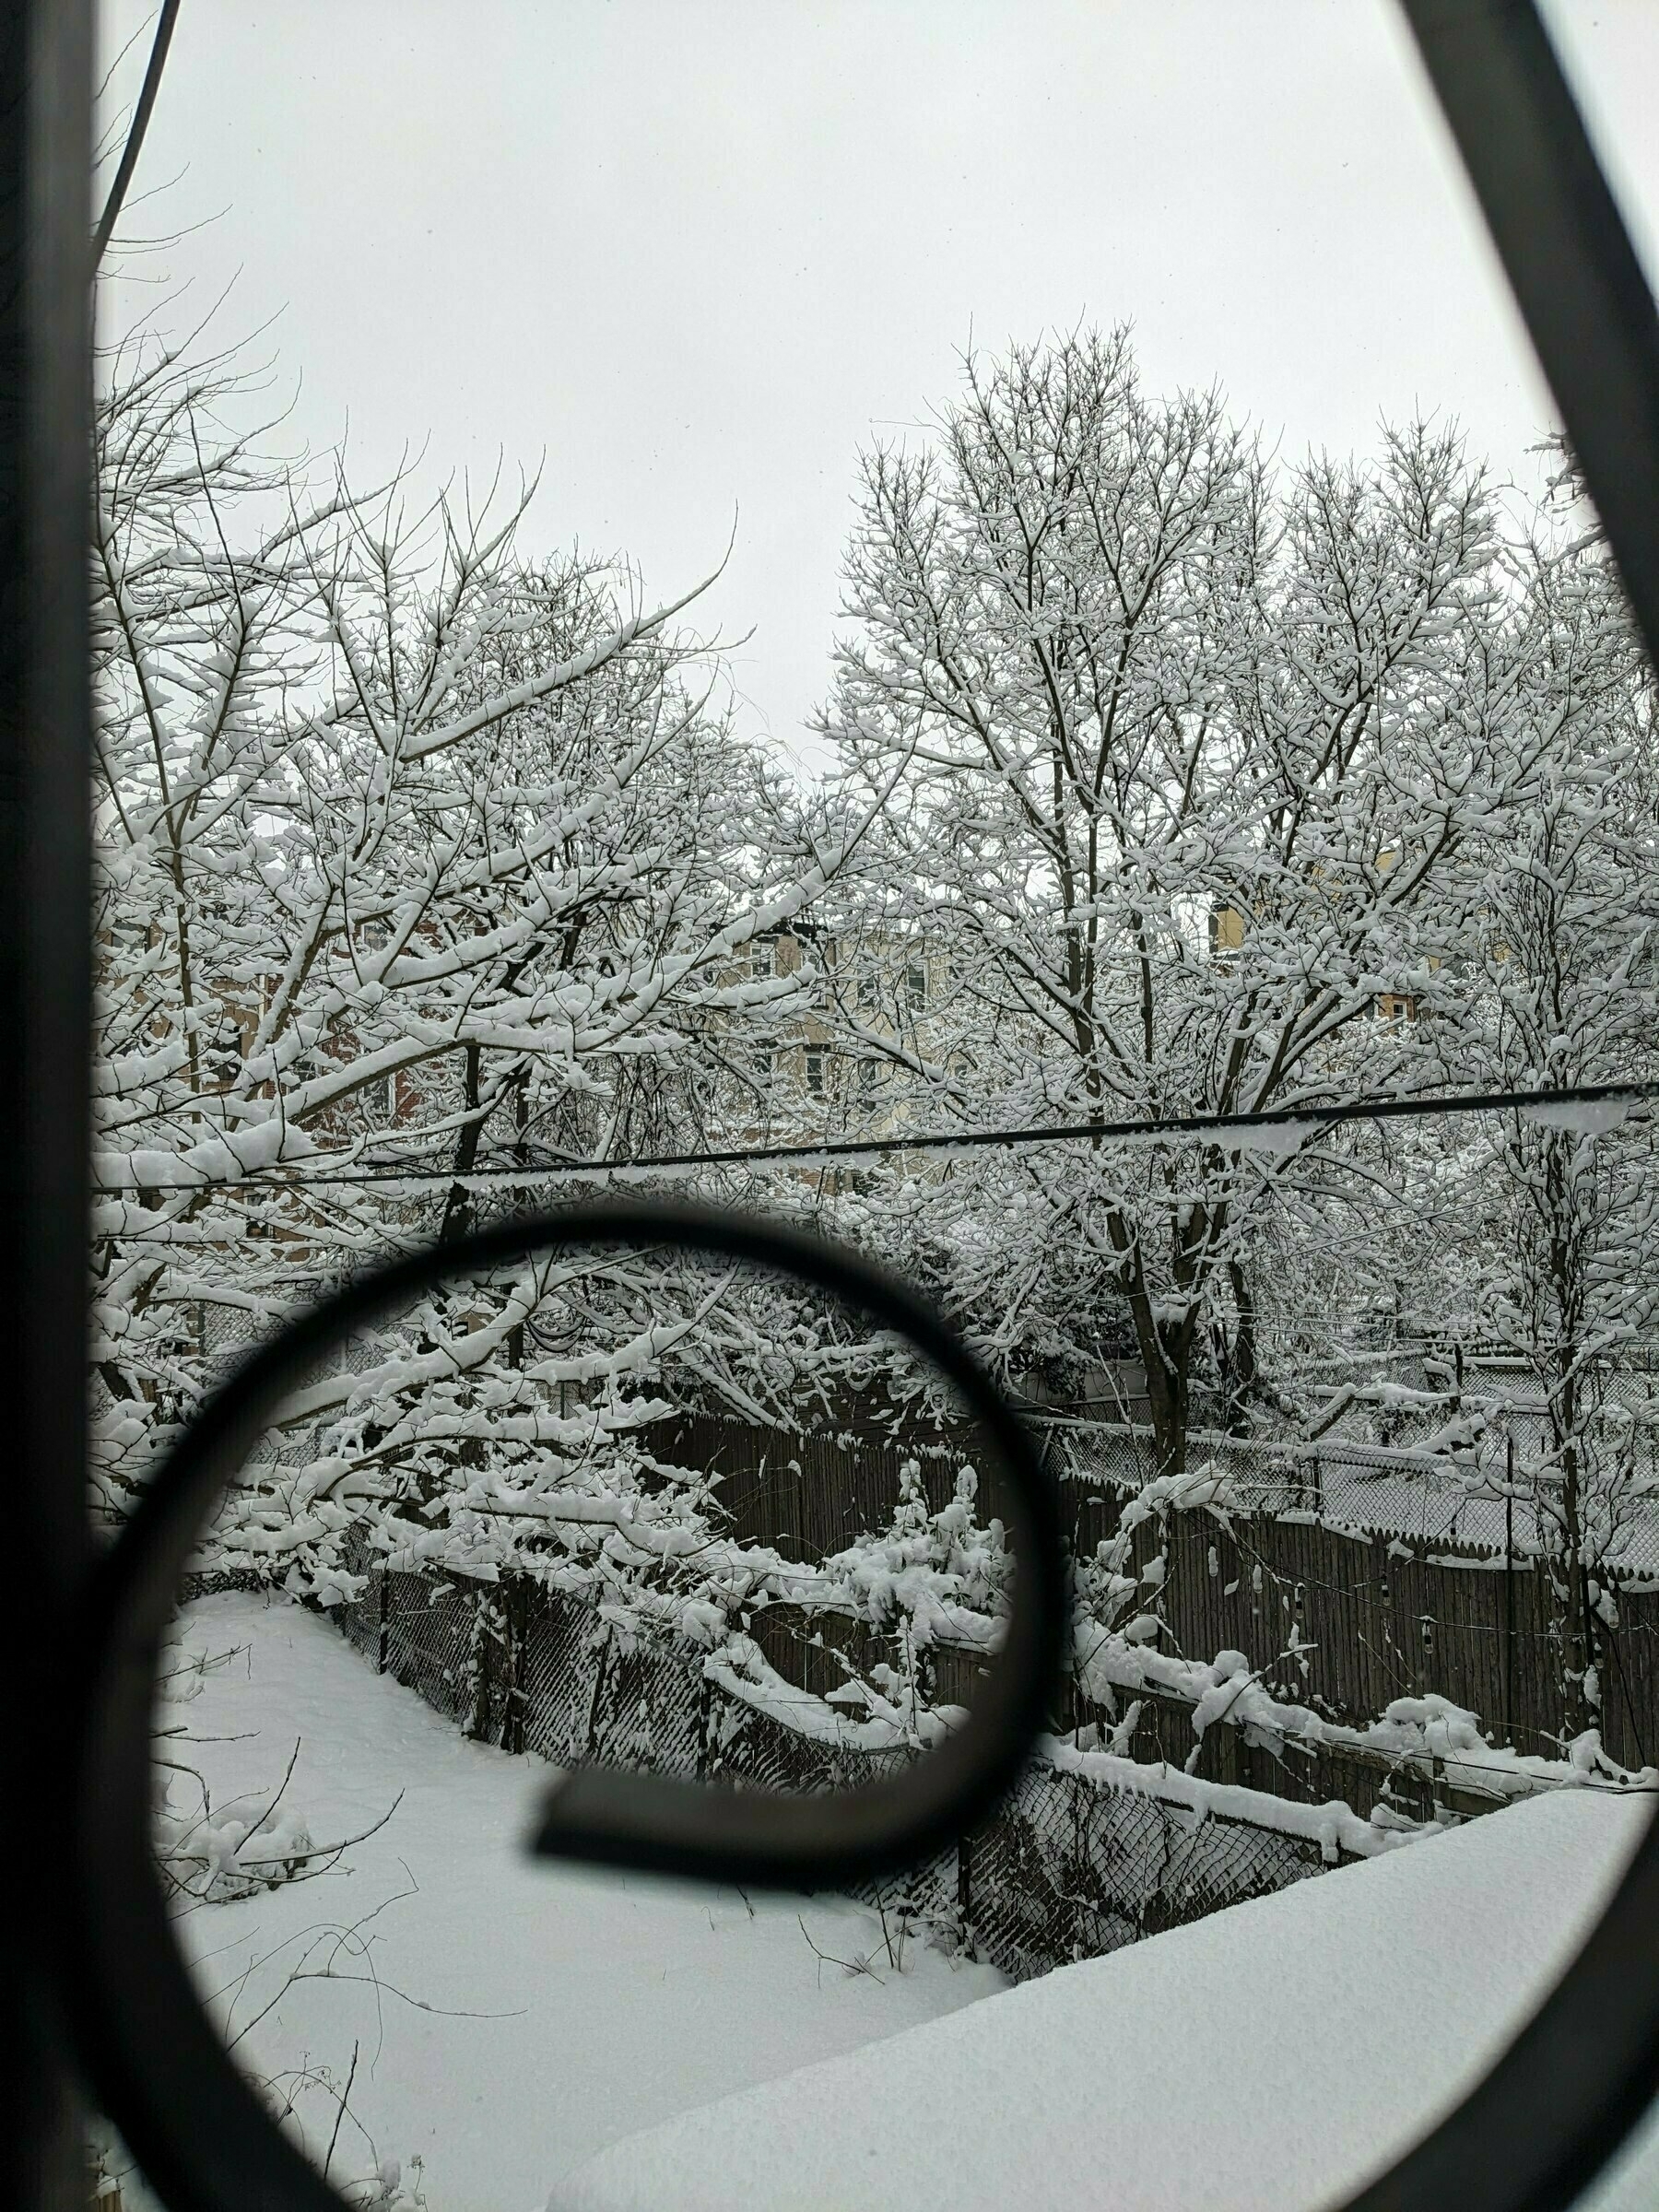 Snow-covered tree branches seen through a window with a grate